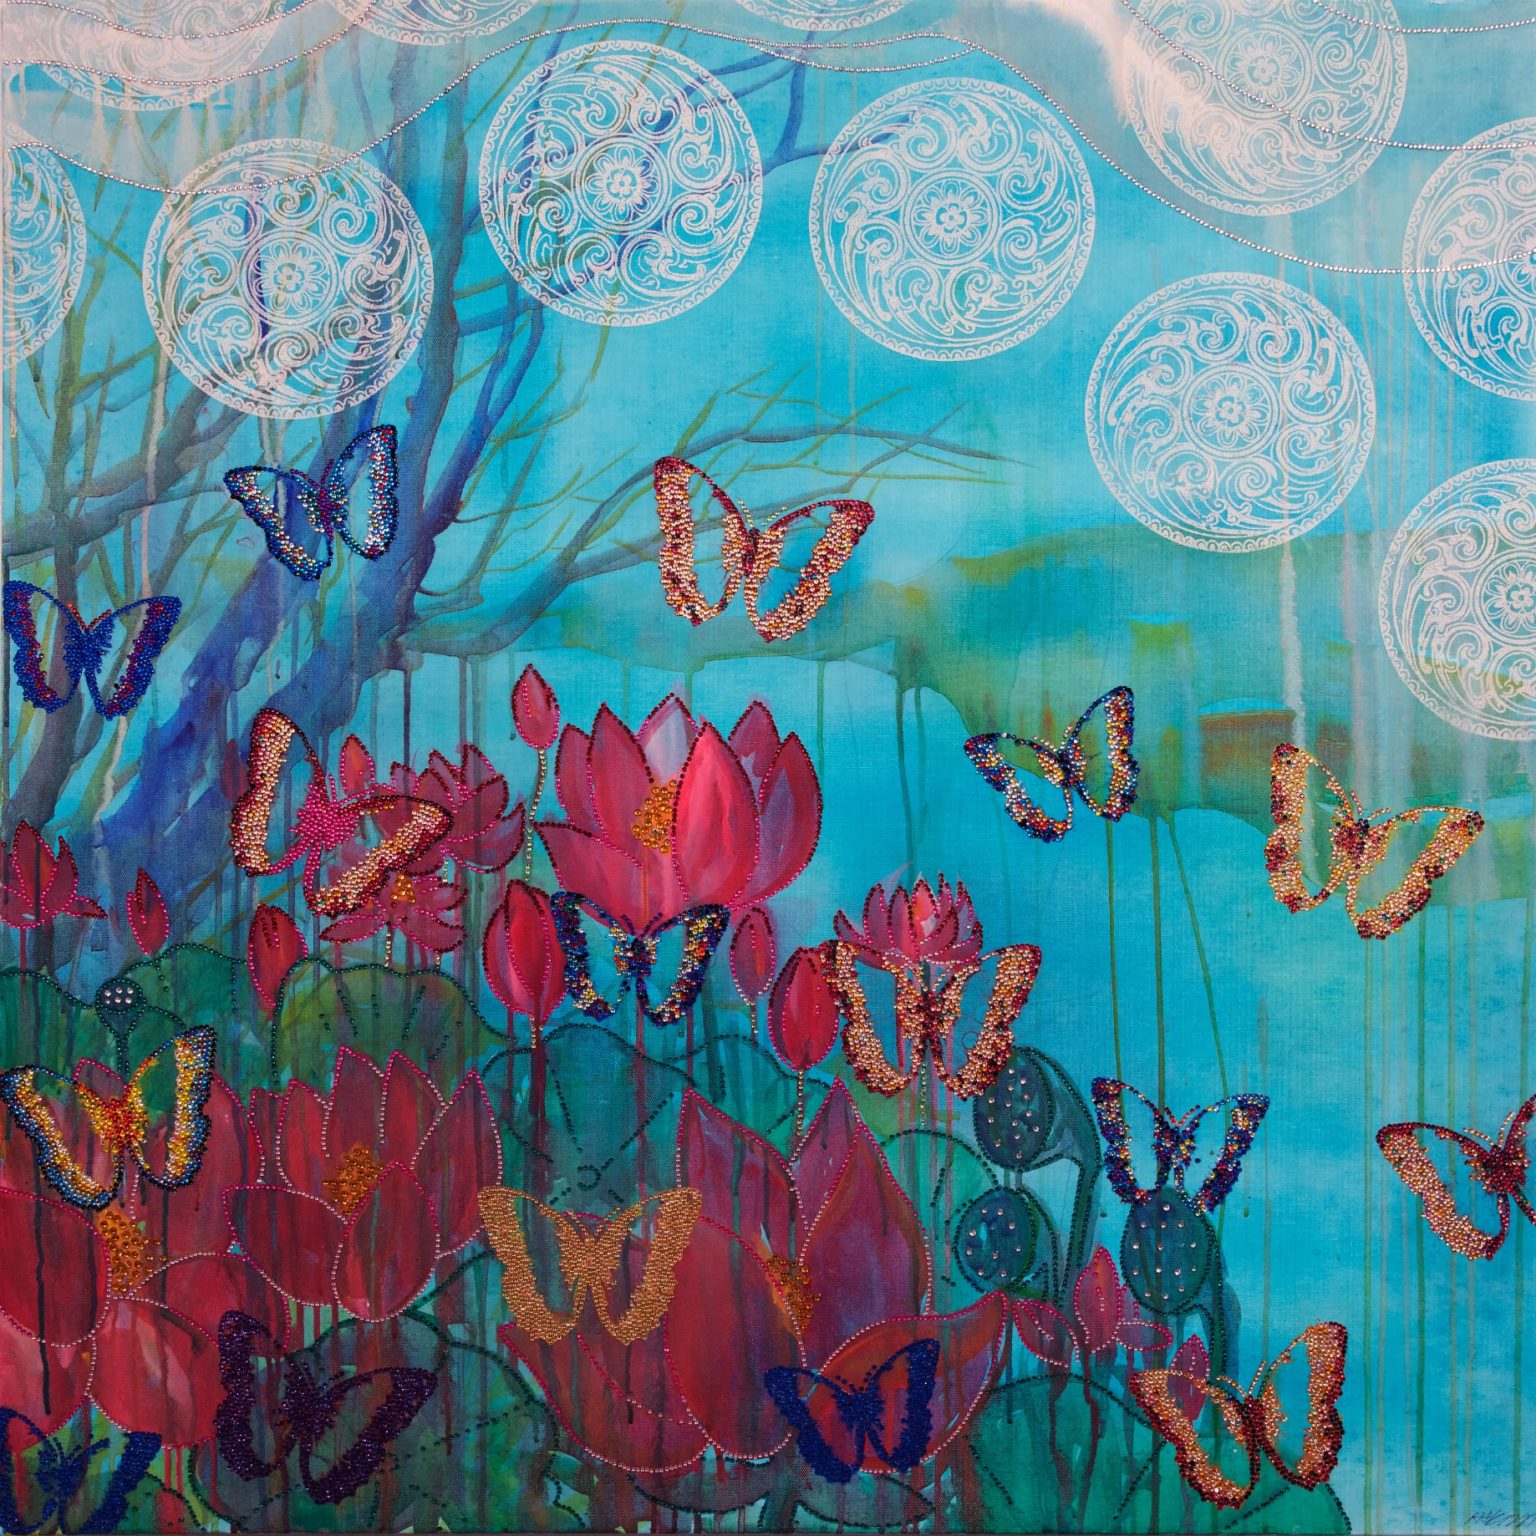 Abstract painting of nature scene using bright colors and featuring butterflies and rhinestones